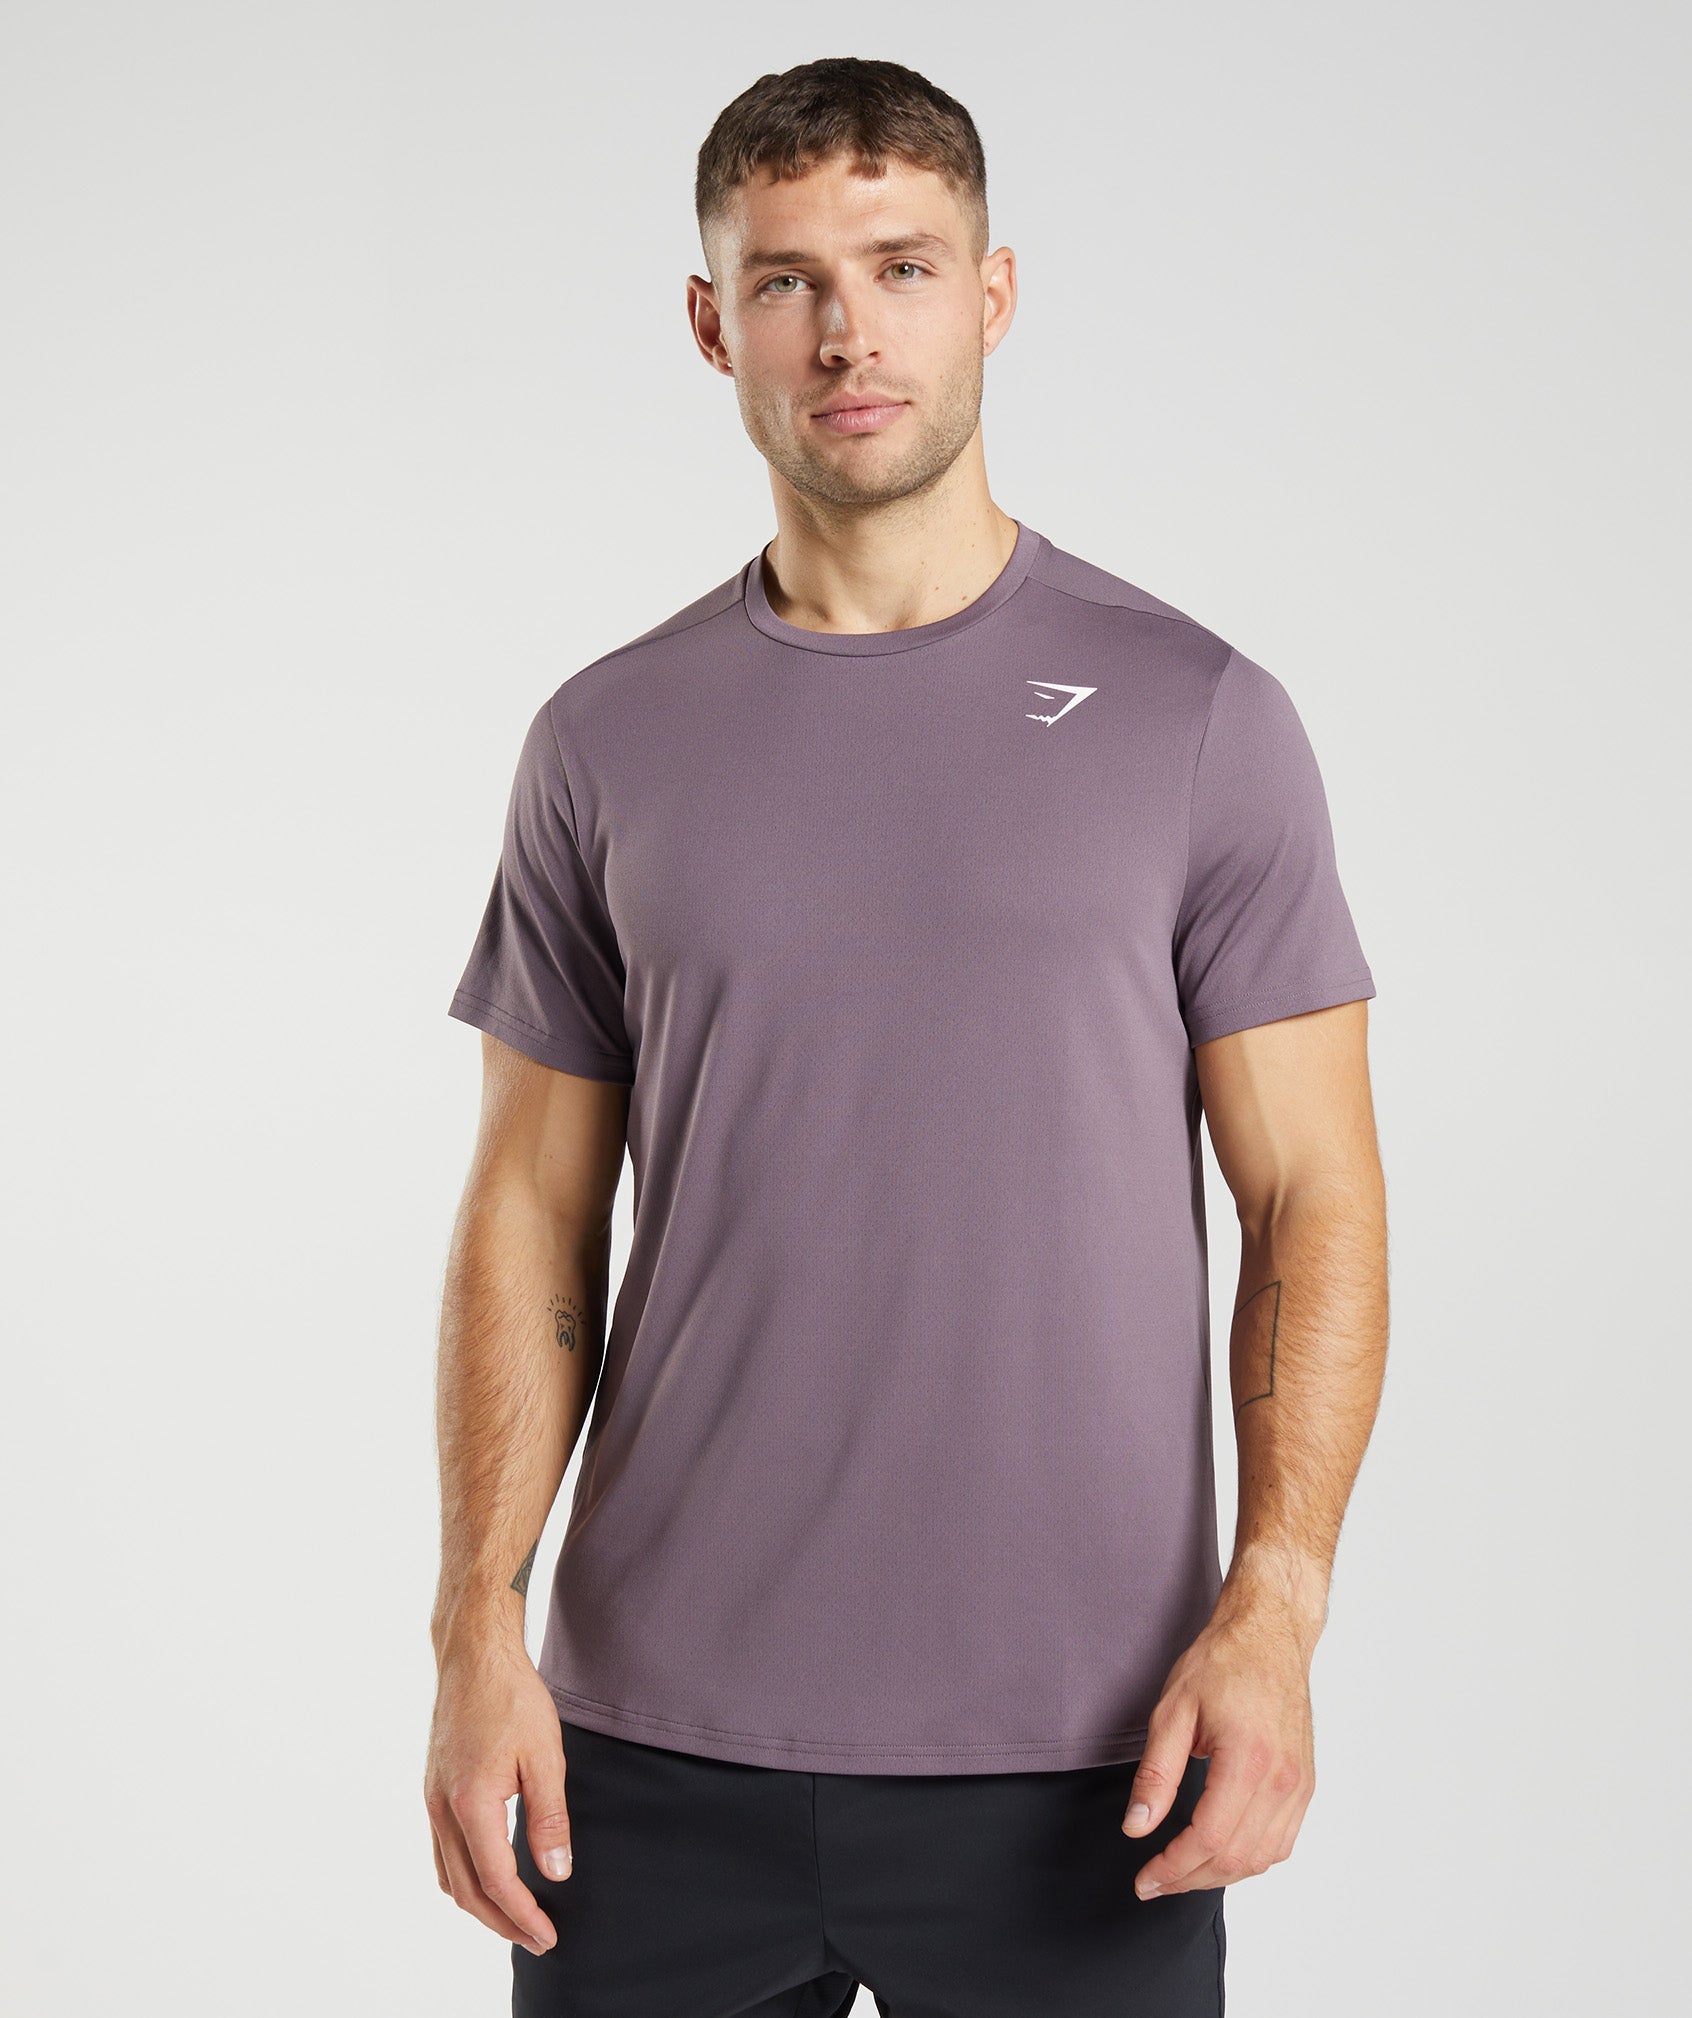 Arrival T-Shirt in Musk Lilac - view 1